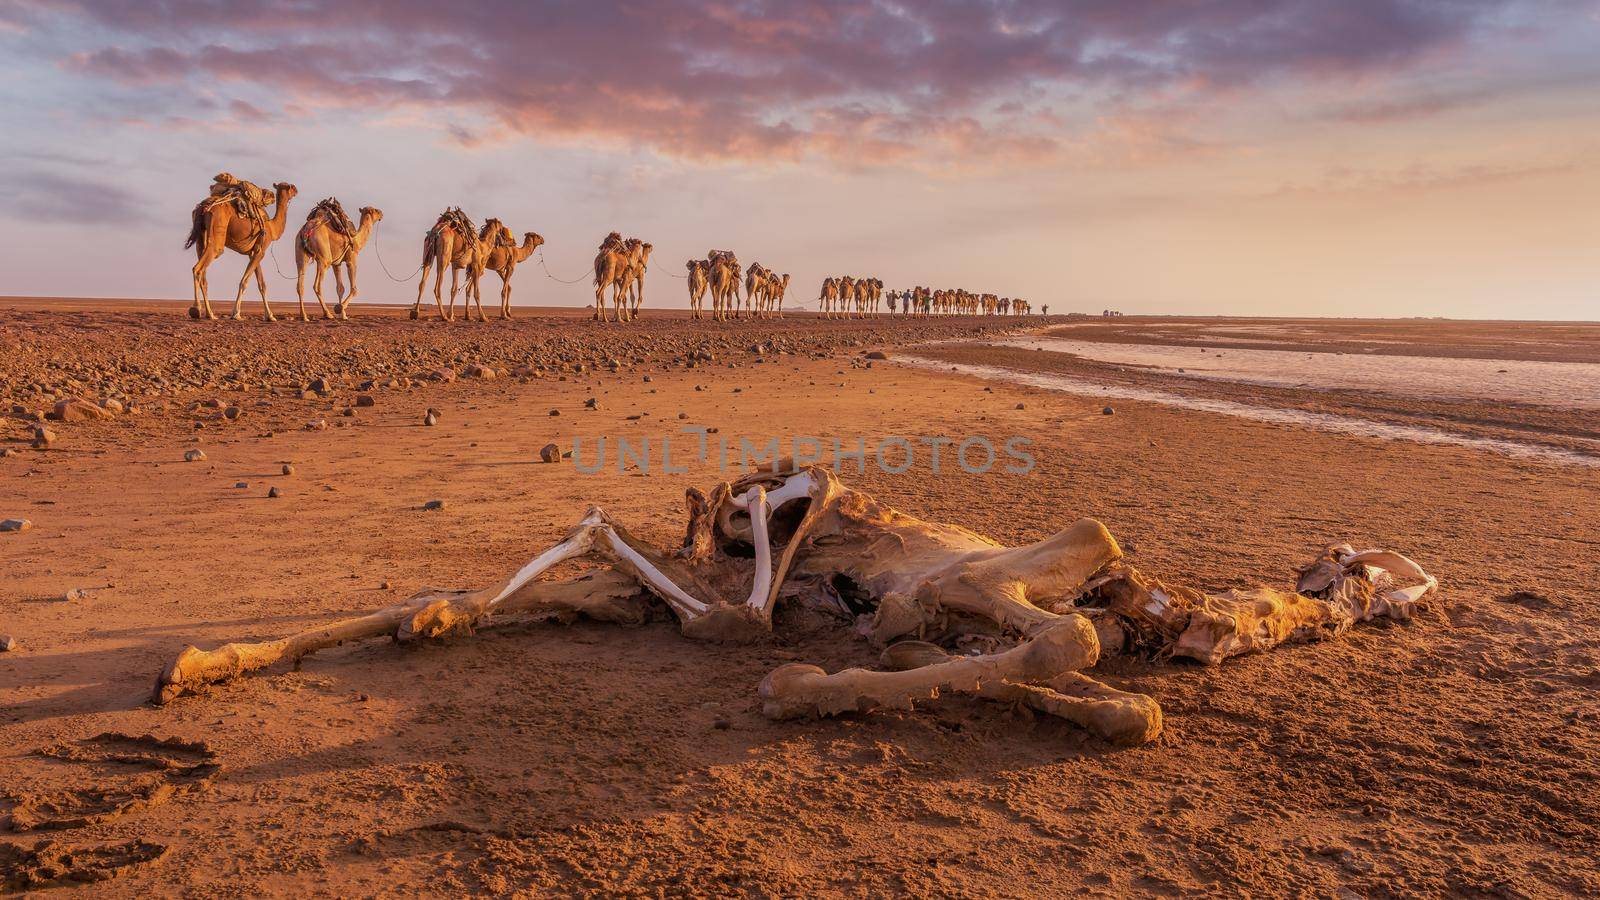 A dead dromedary along the caravan way at sunrise in the Danakil Depression in Ethiopia, Africa.